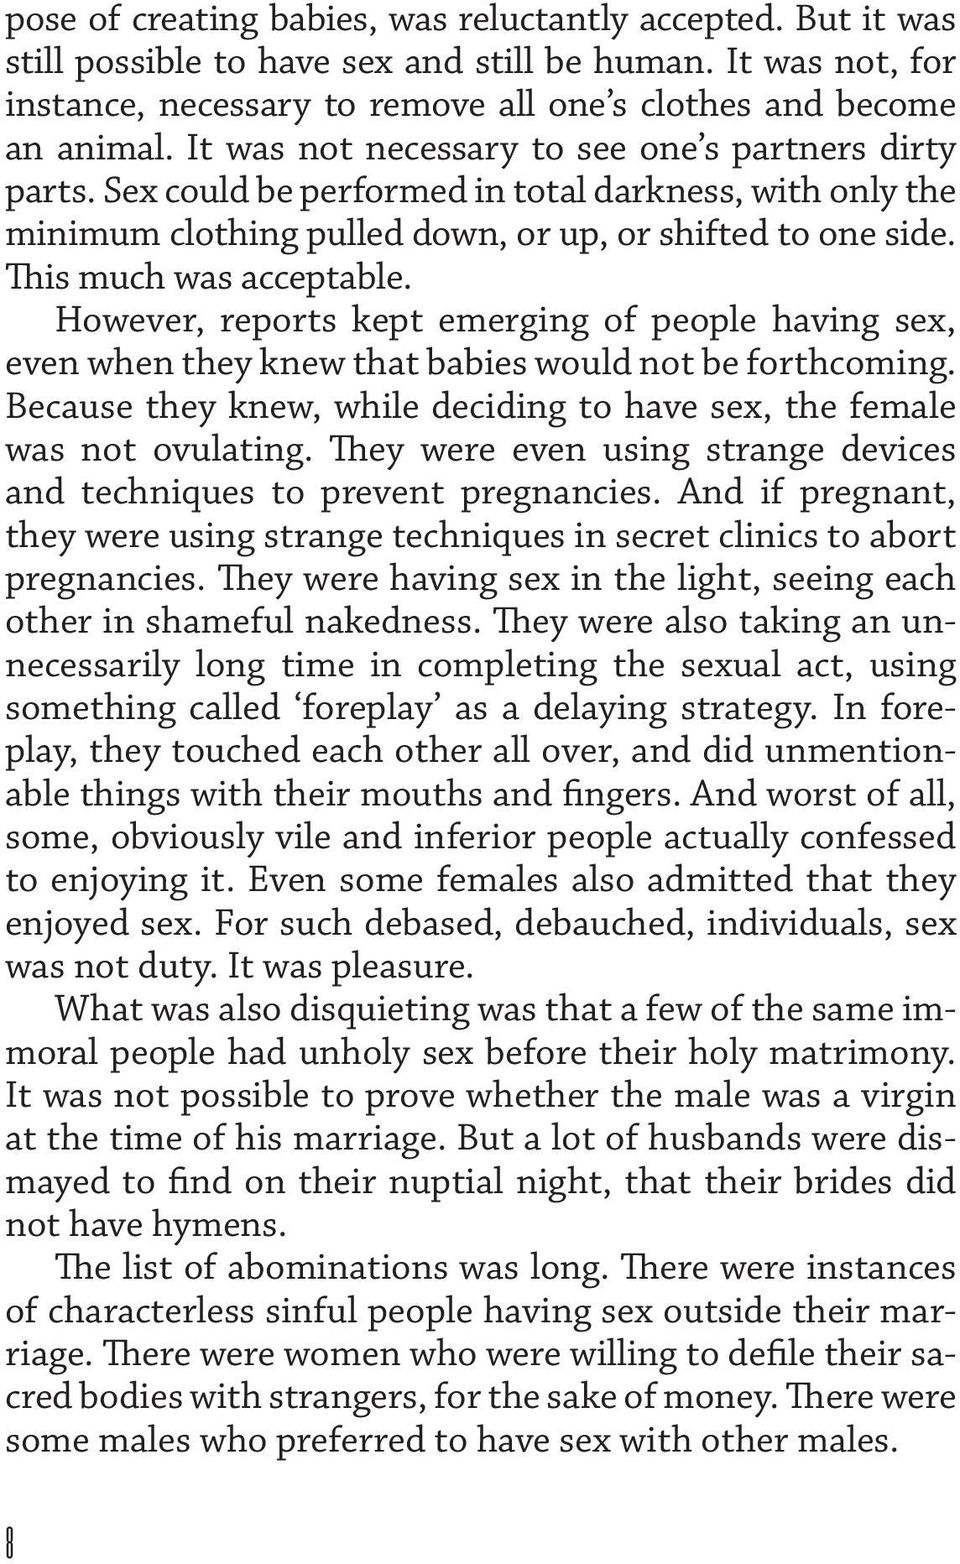 However, reports kept emerging of people having sex, even when they knew that babies would not be forthcoming. Because they knew, while deciding to have sex, the female was not ovulating.